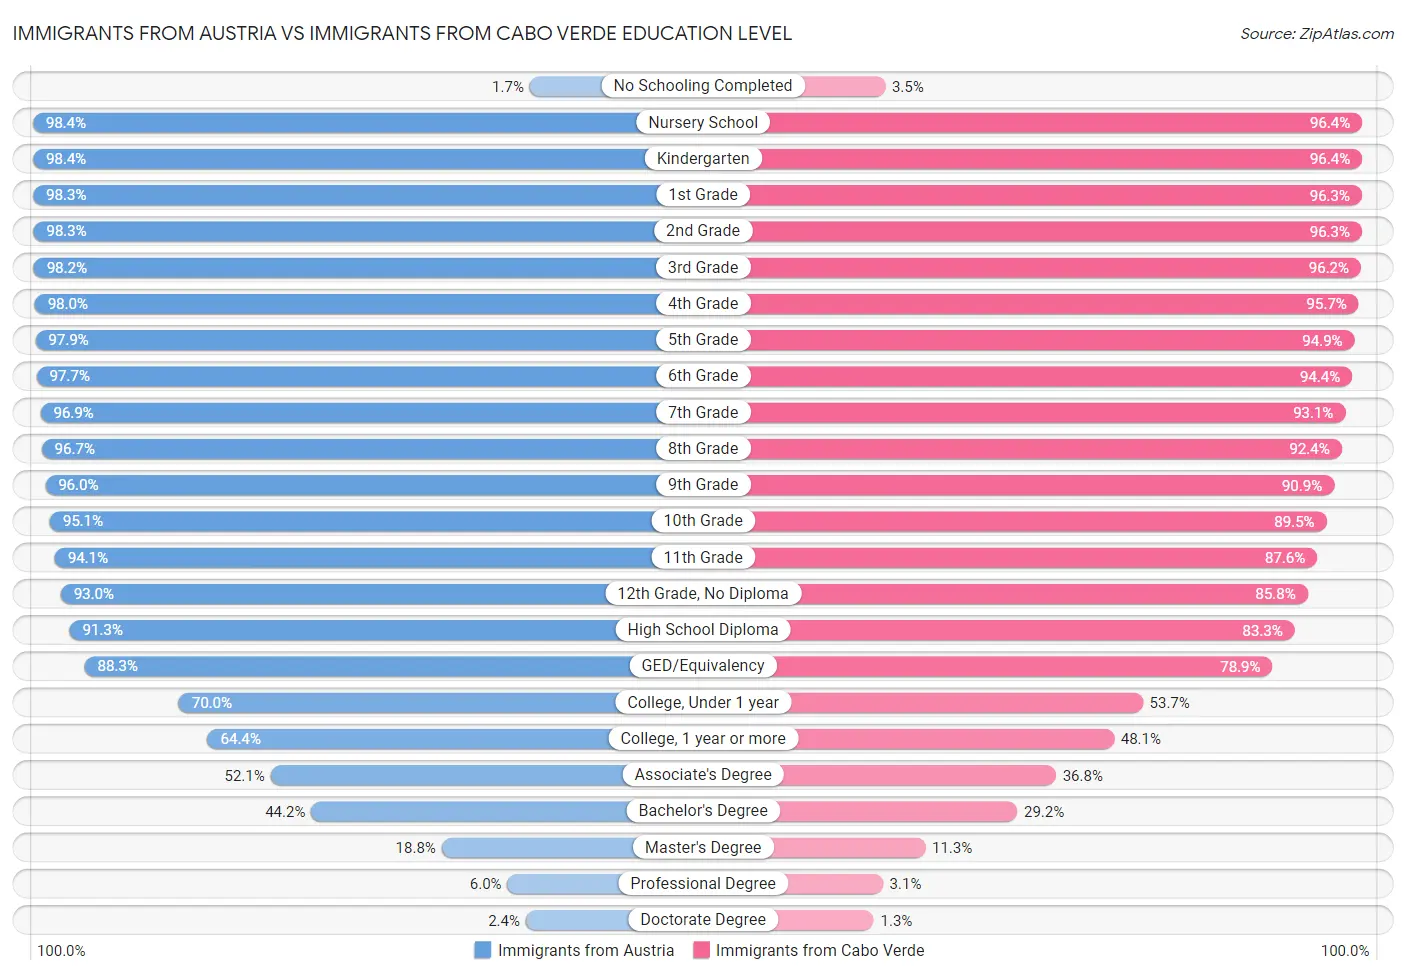 Immigrants from Austria vs Immigrants from Cabo Verde Education Level